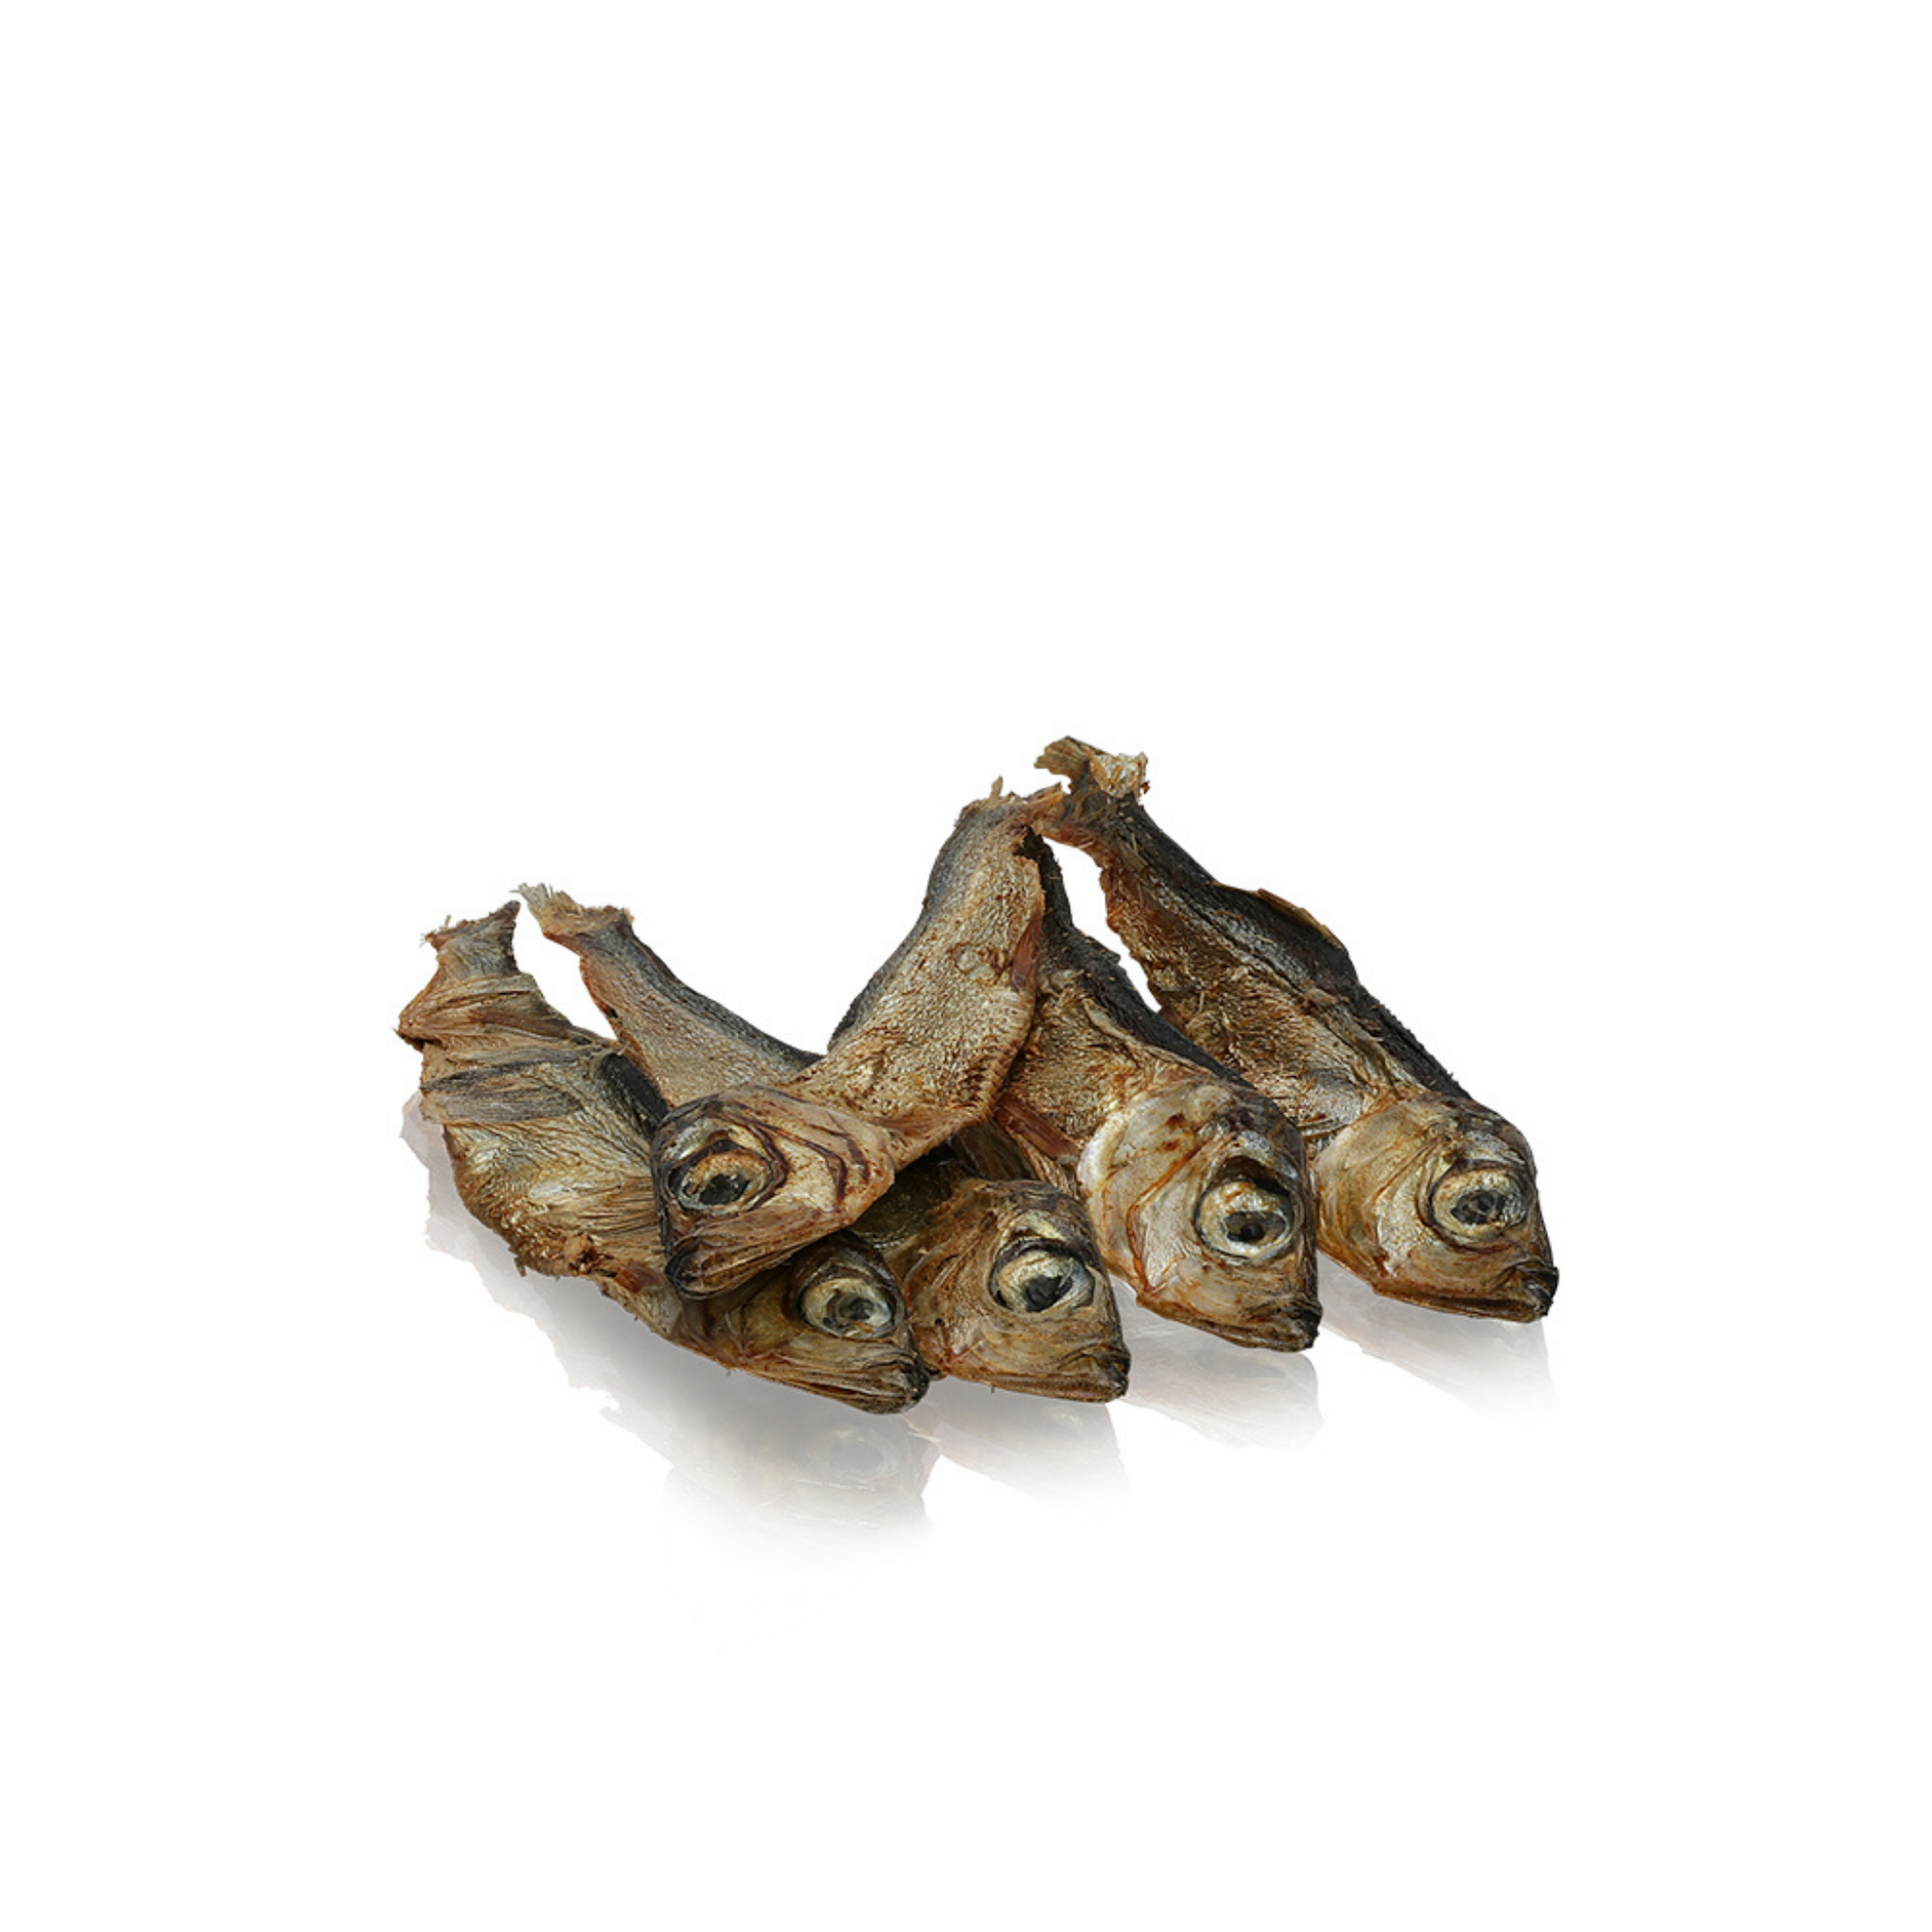 ESSENTIAL Delicious dried small fish